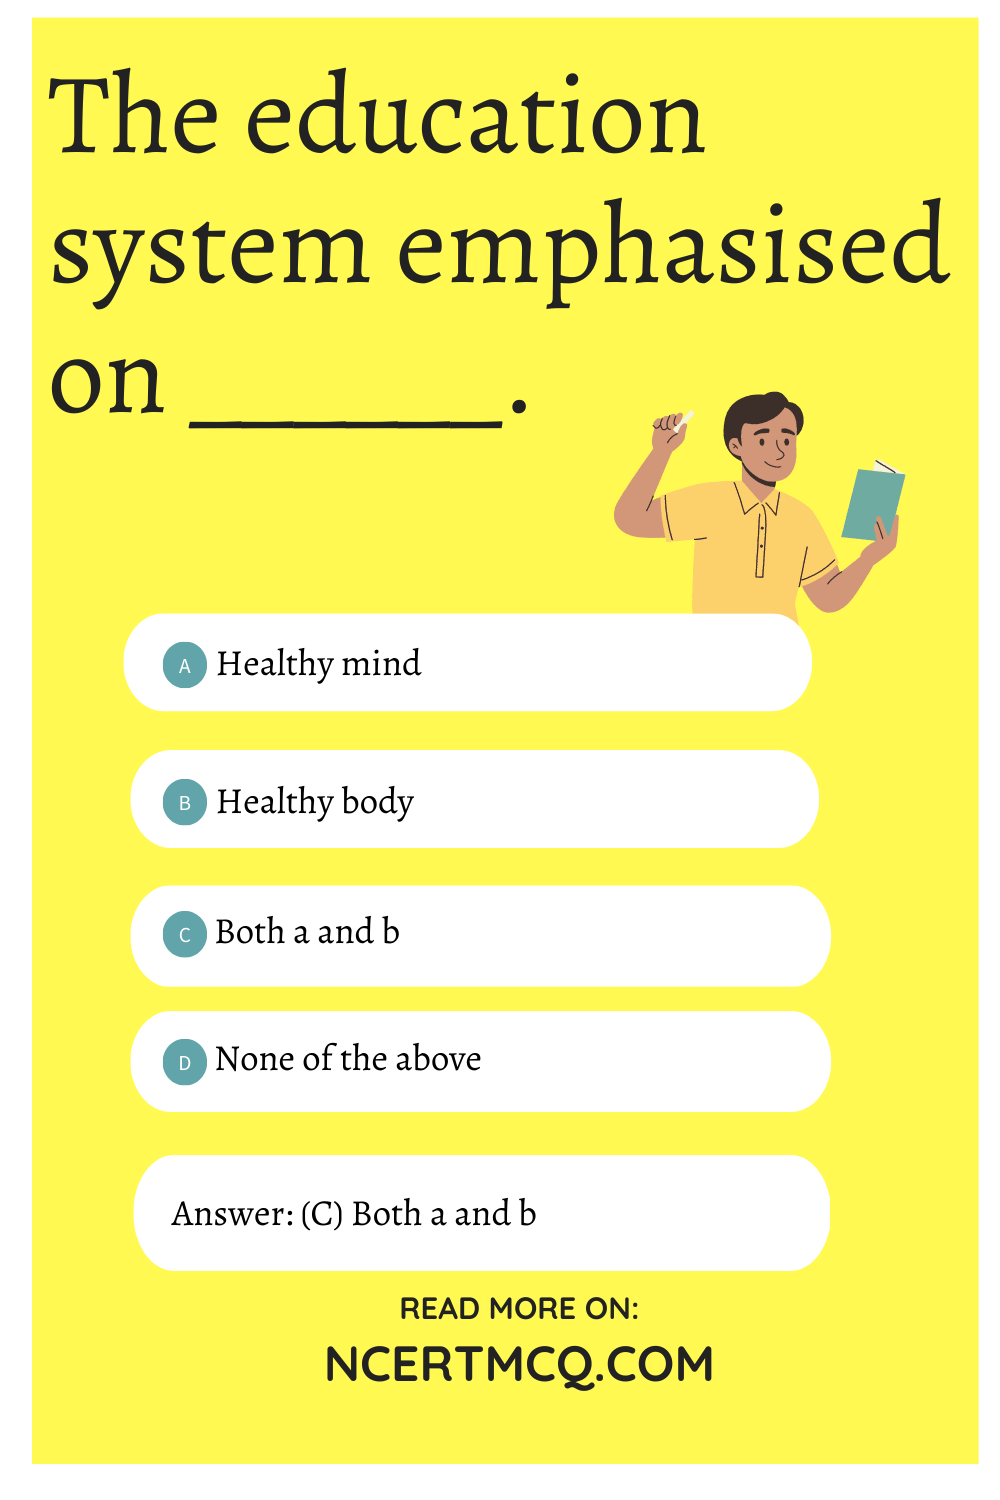 The education system emphasised on ______.